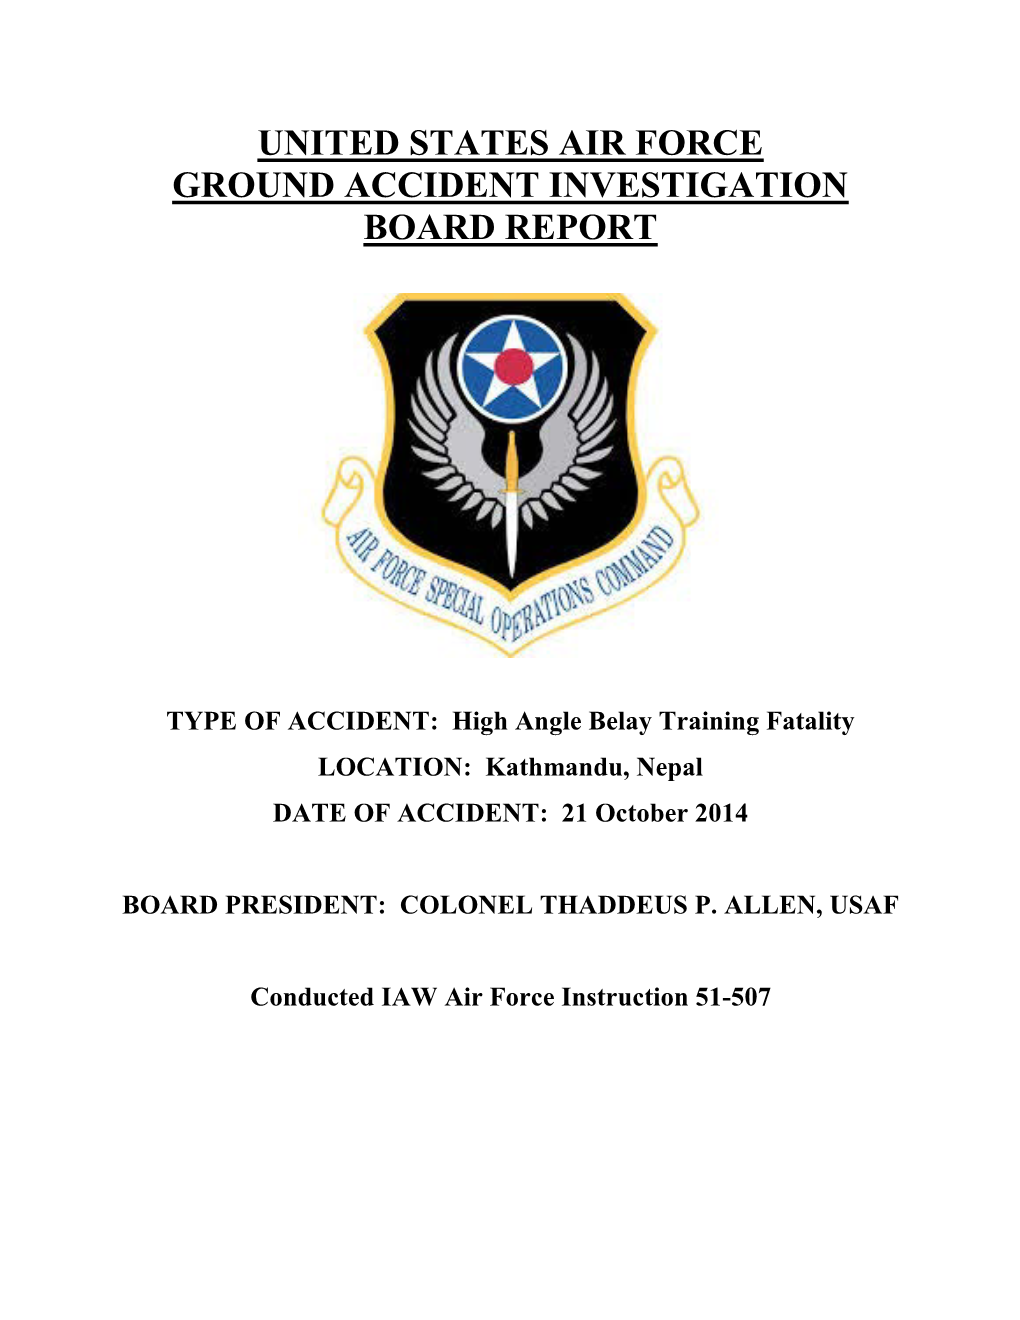 United States Air Force Ground Accident Investigation Board Report